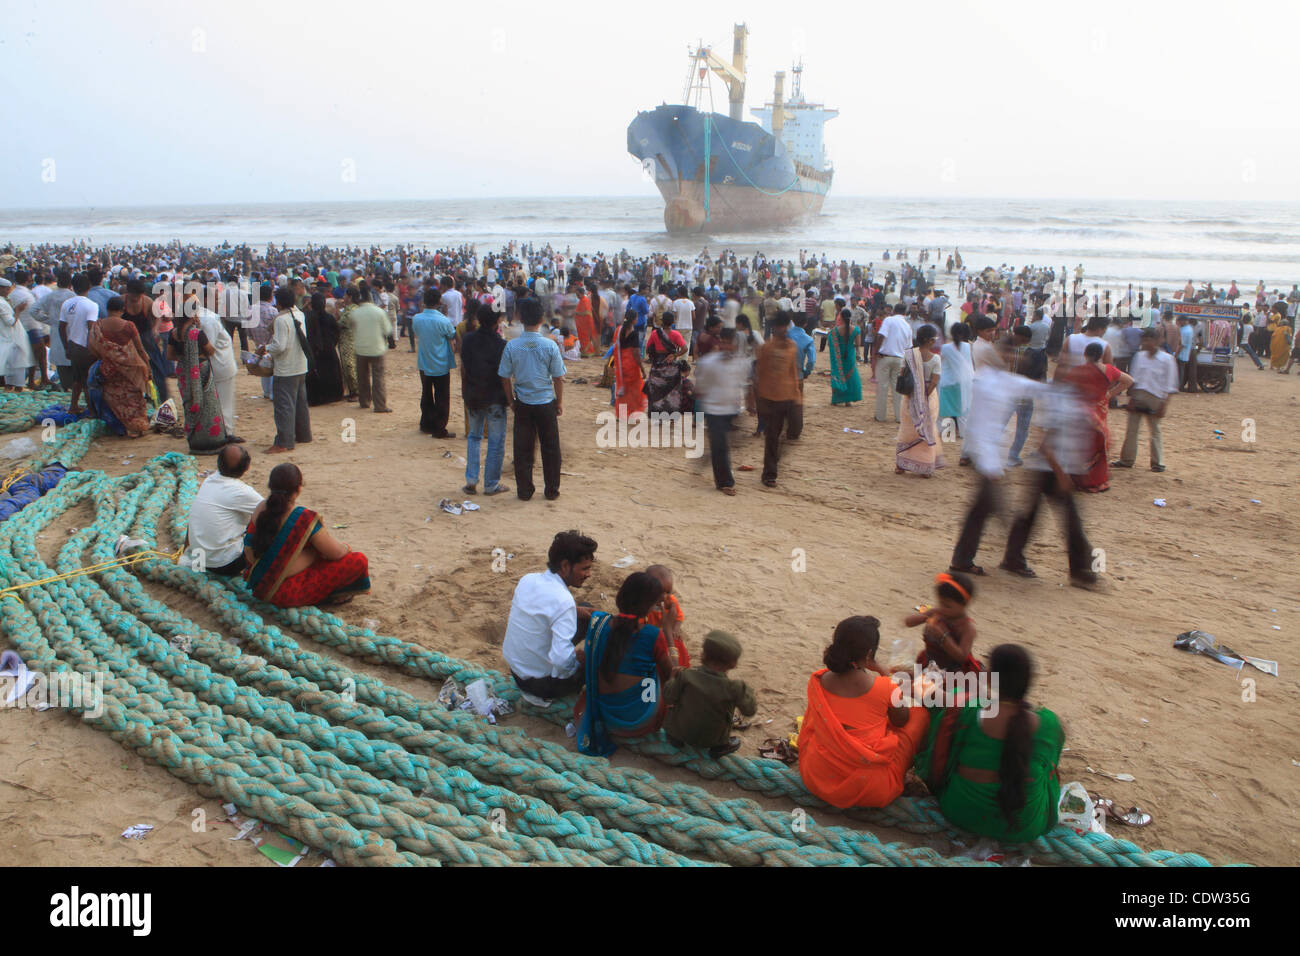 An unusual sight greeted the monsoon Revellers at the Juhu Chowpatty beach in Mumbai,India as the MV Wisdom,a merchant ship has been grounded since June 11 after it broke loose from the towing tug and it drifted ashore while it was being towed away to Alang shipyard to be broken down as scrap. Techn Stock Photo